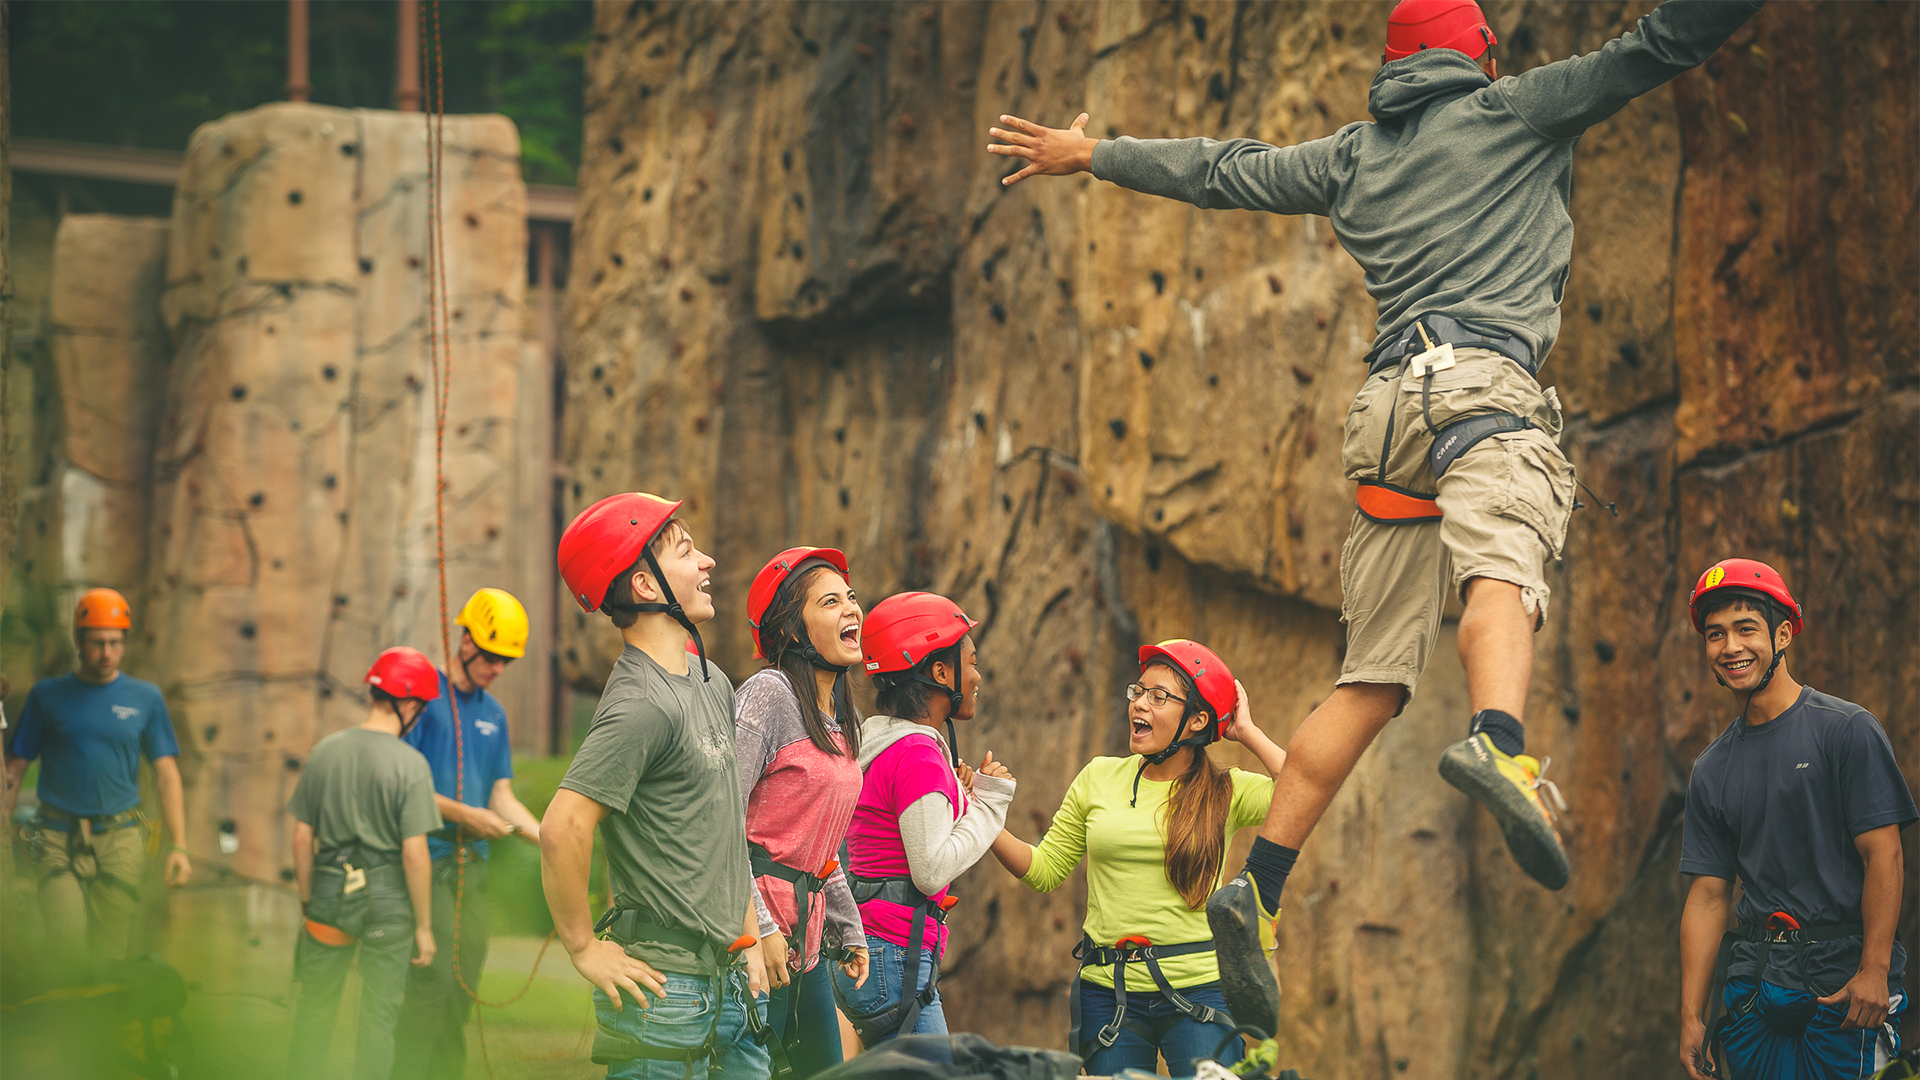 A group of Venturing Scouts belay or watch and cheer for a Venturing Scout climbing an outdoor rock wall. Additional groups of Venturing Scouts can be seen in the background also climbing or belaying and cheering their fellow Scouts up other walls.